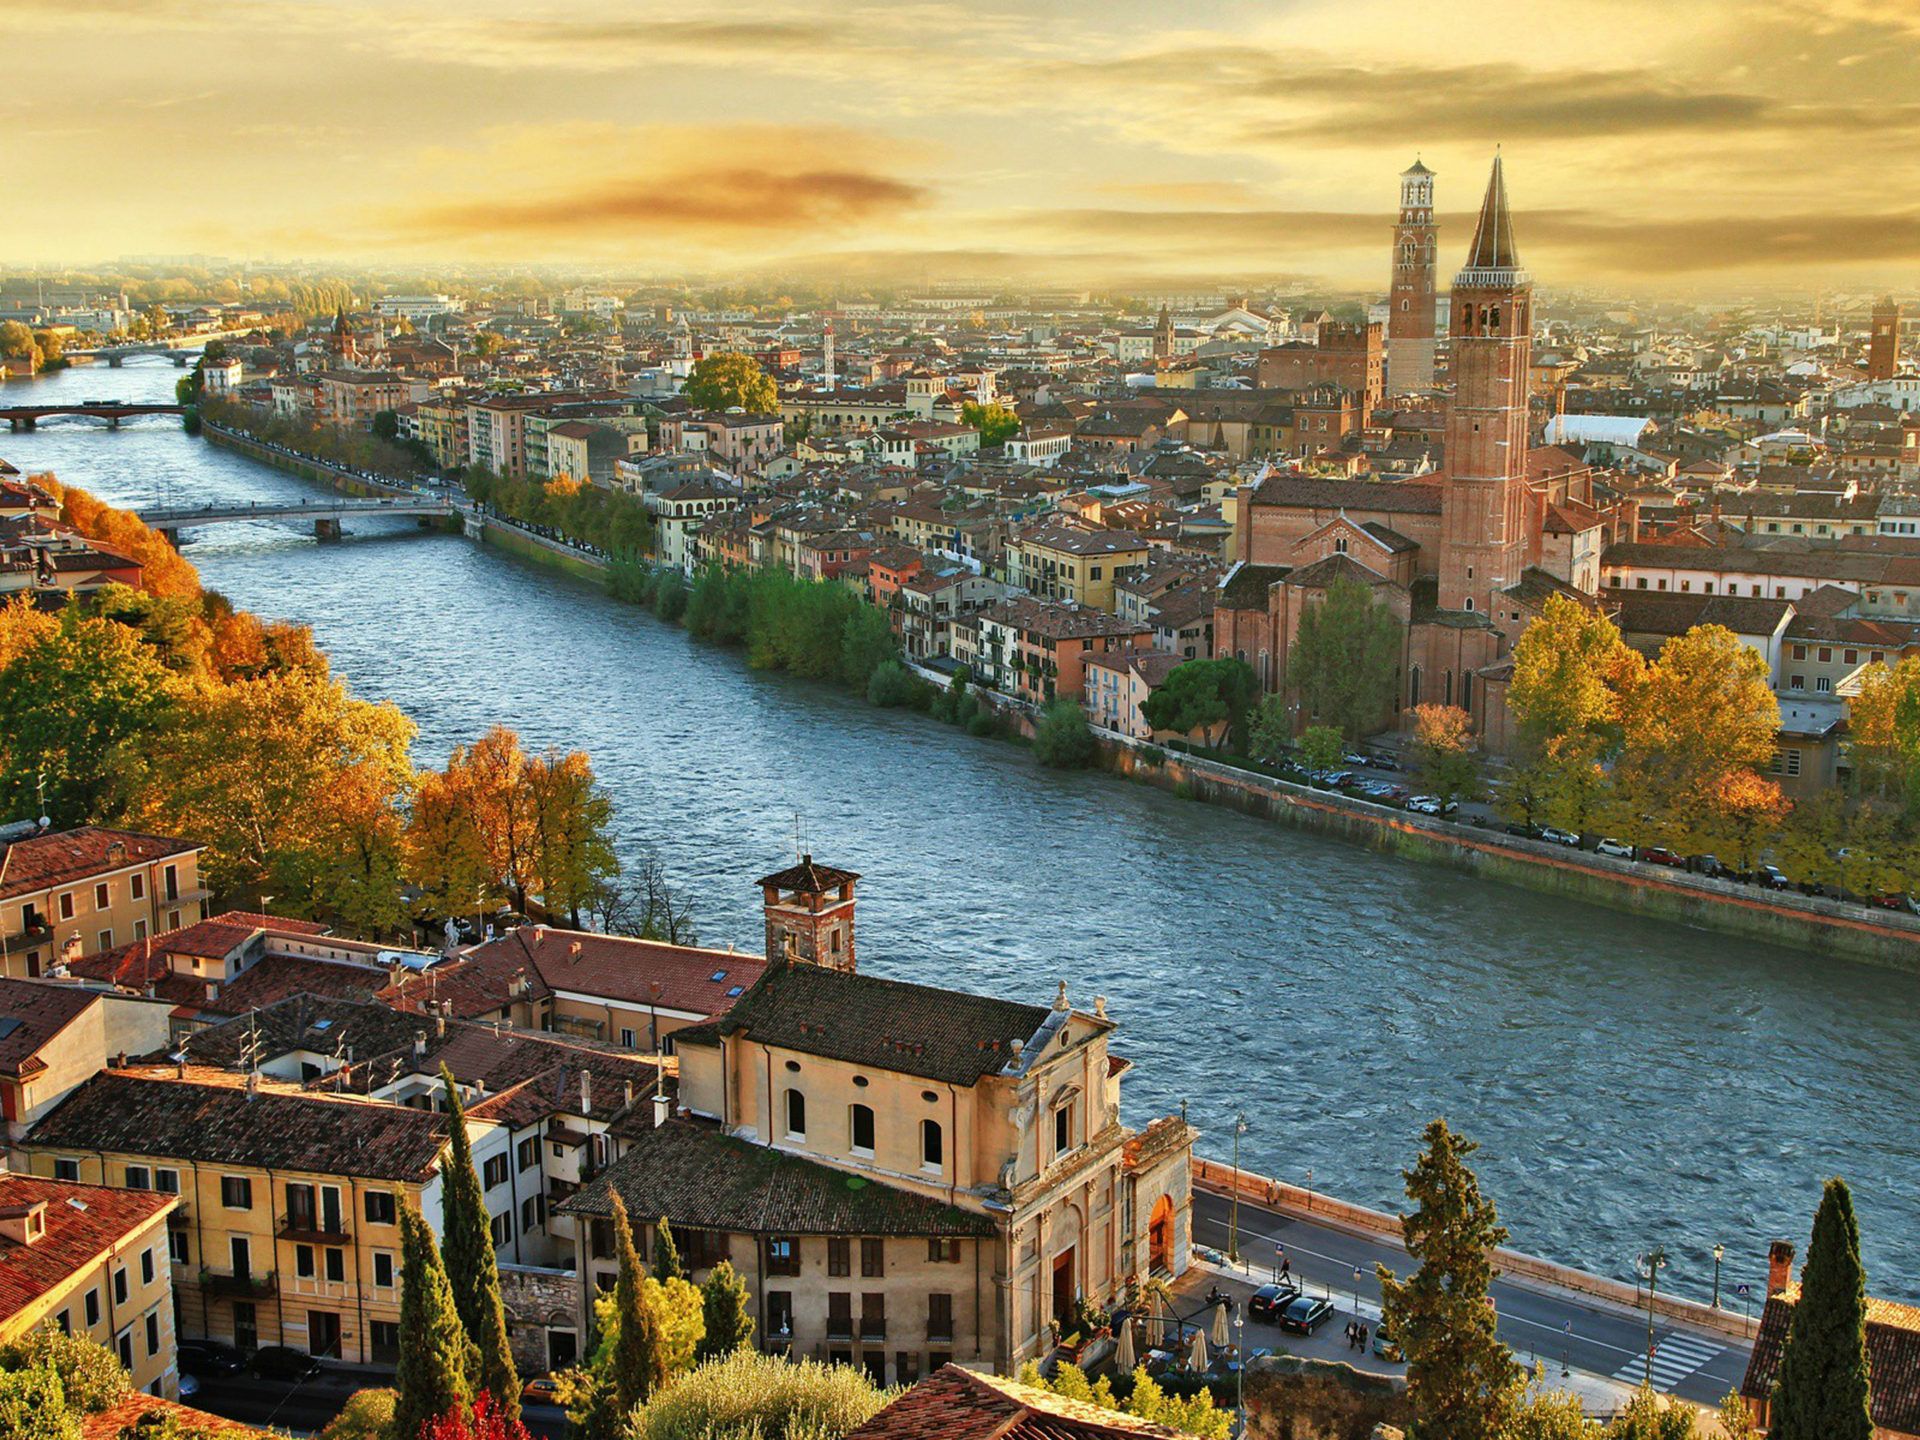 Verona And Adige River From The Bird's Eye View Beautiful City Landscape Of Italy Wallpaper HD 5200x3250, Wallpaper13.com